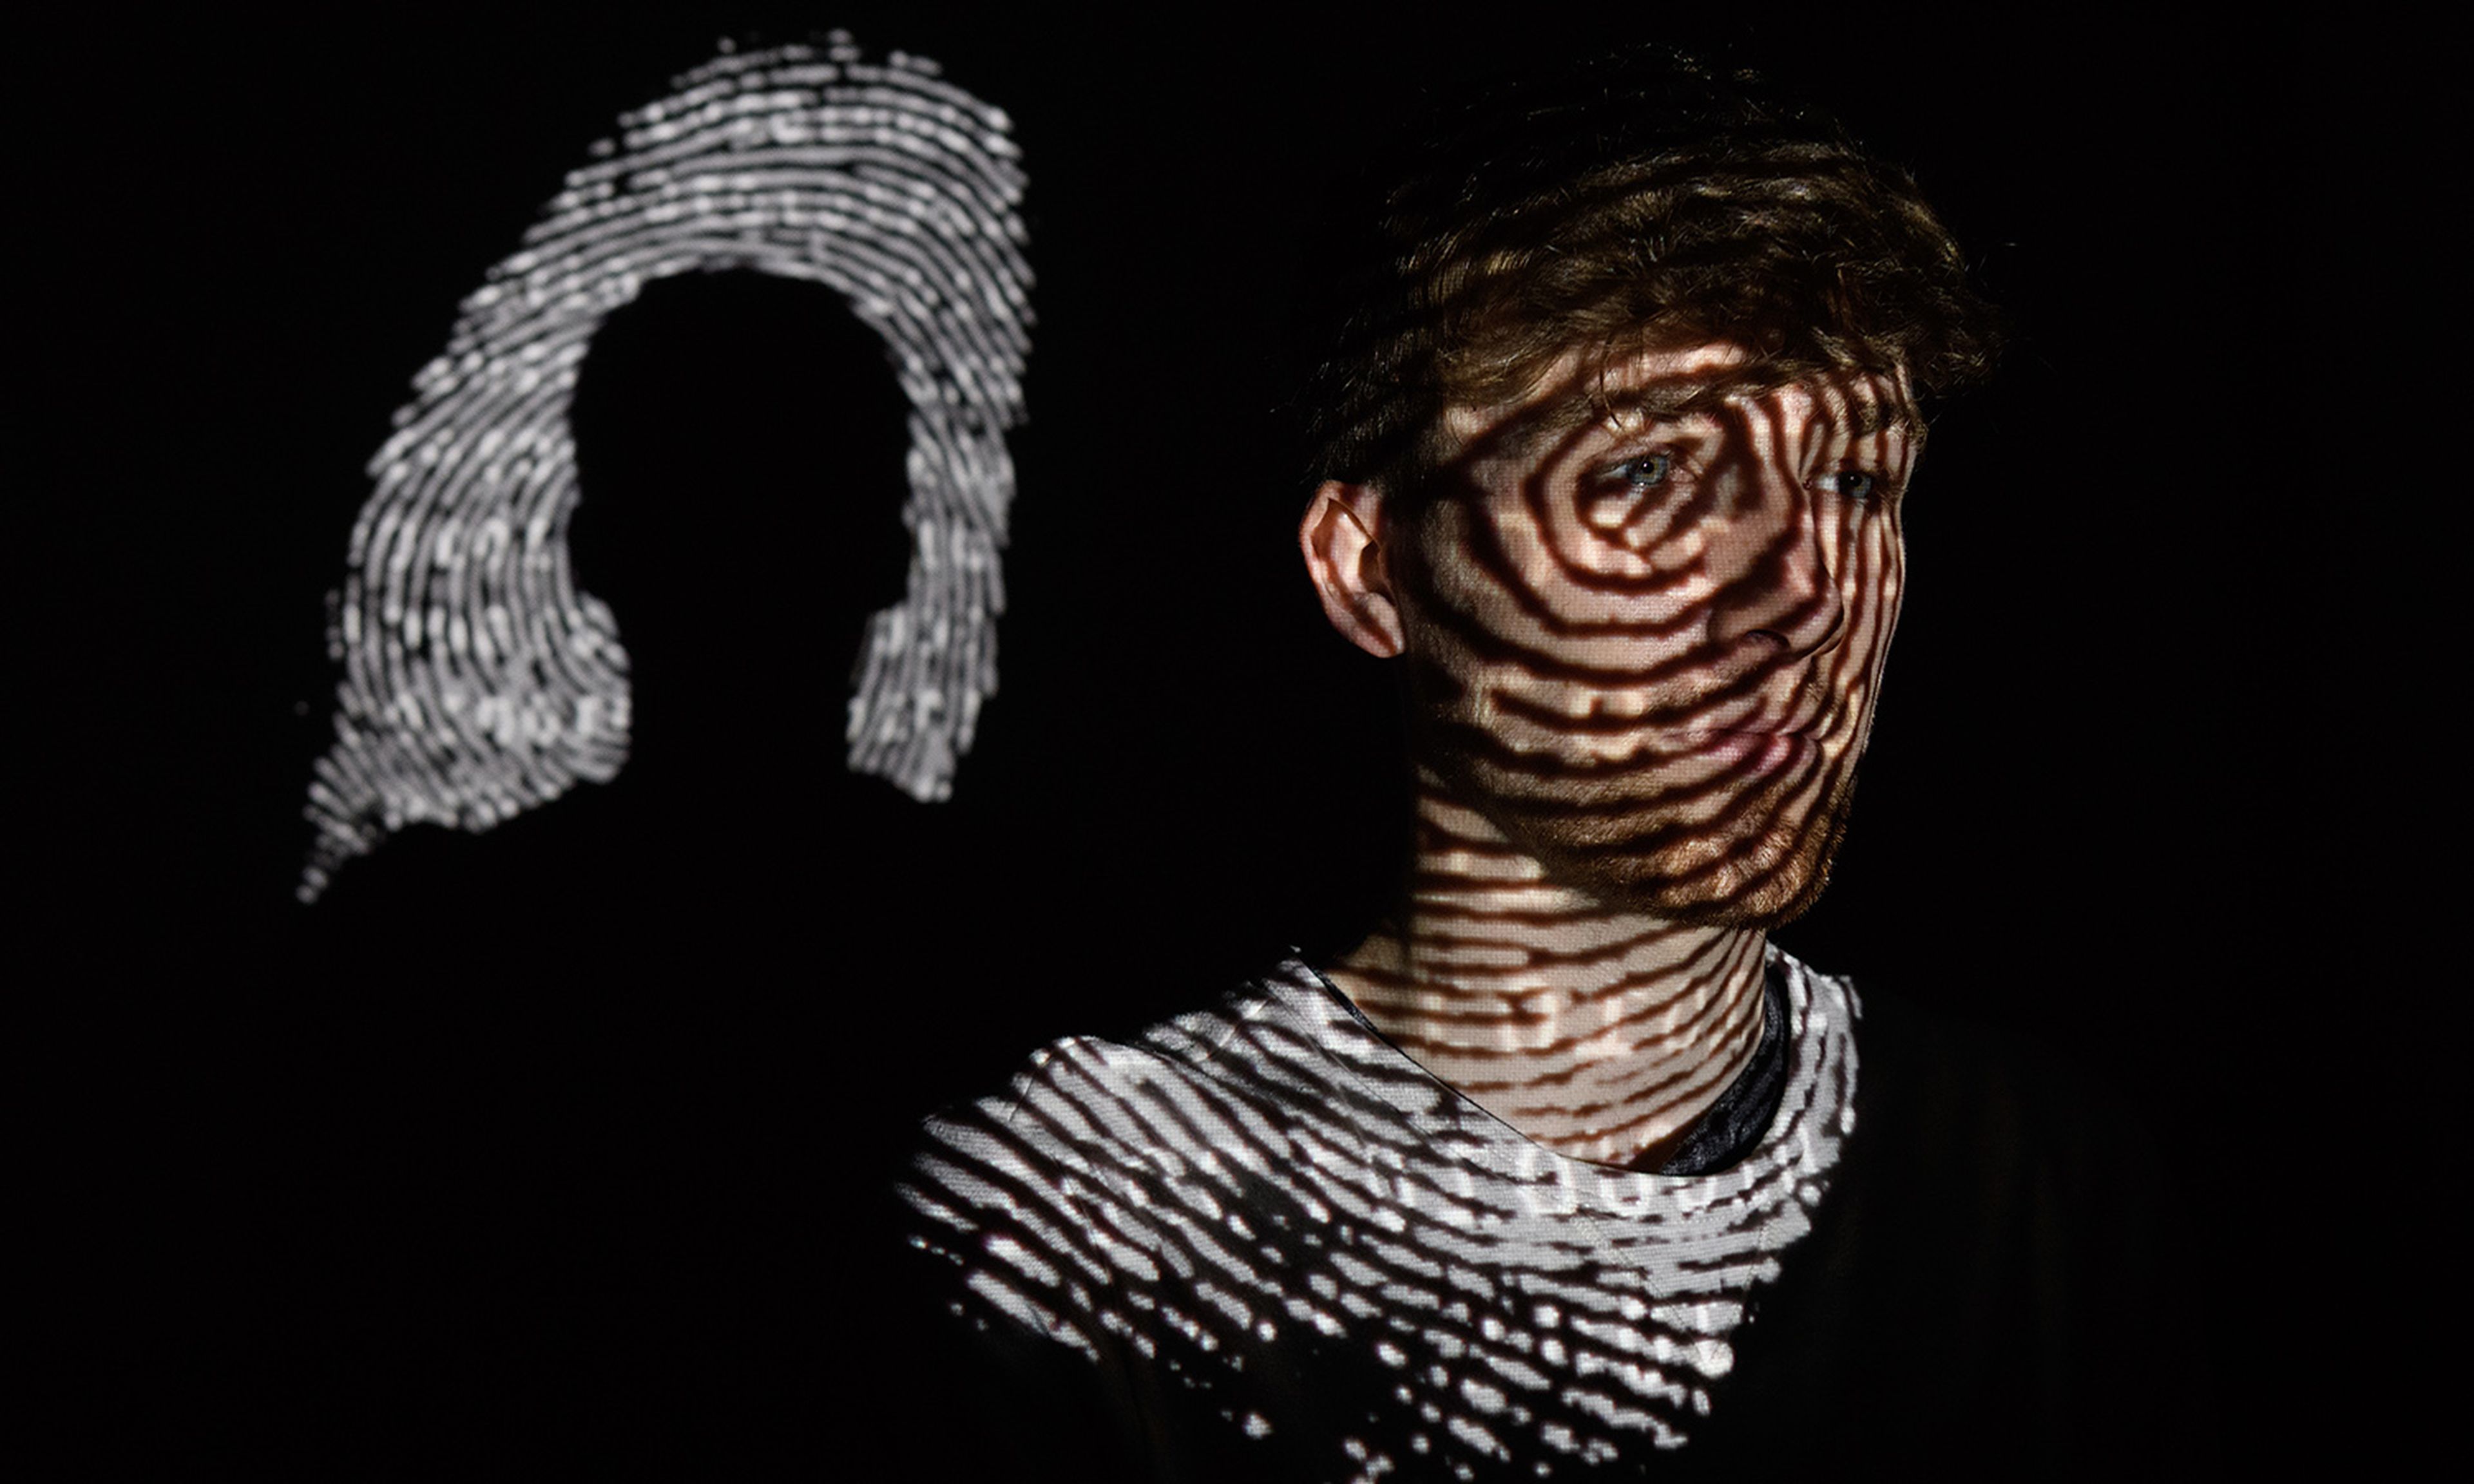 A thumbprint is projected onto a man. (Photo by Leon Neal/Getty Images)